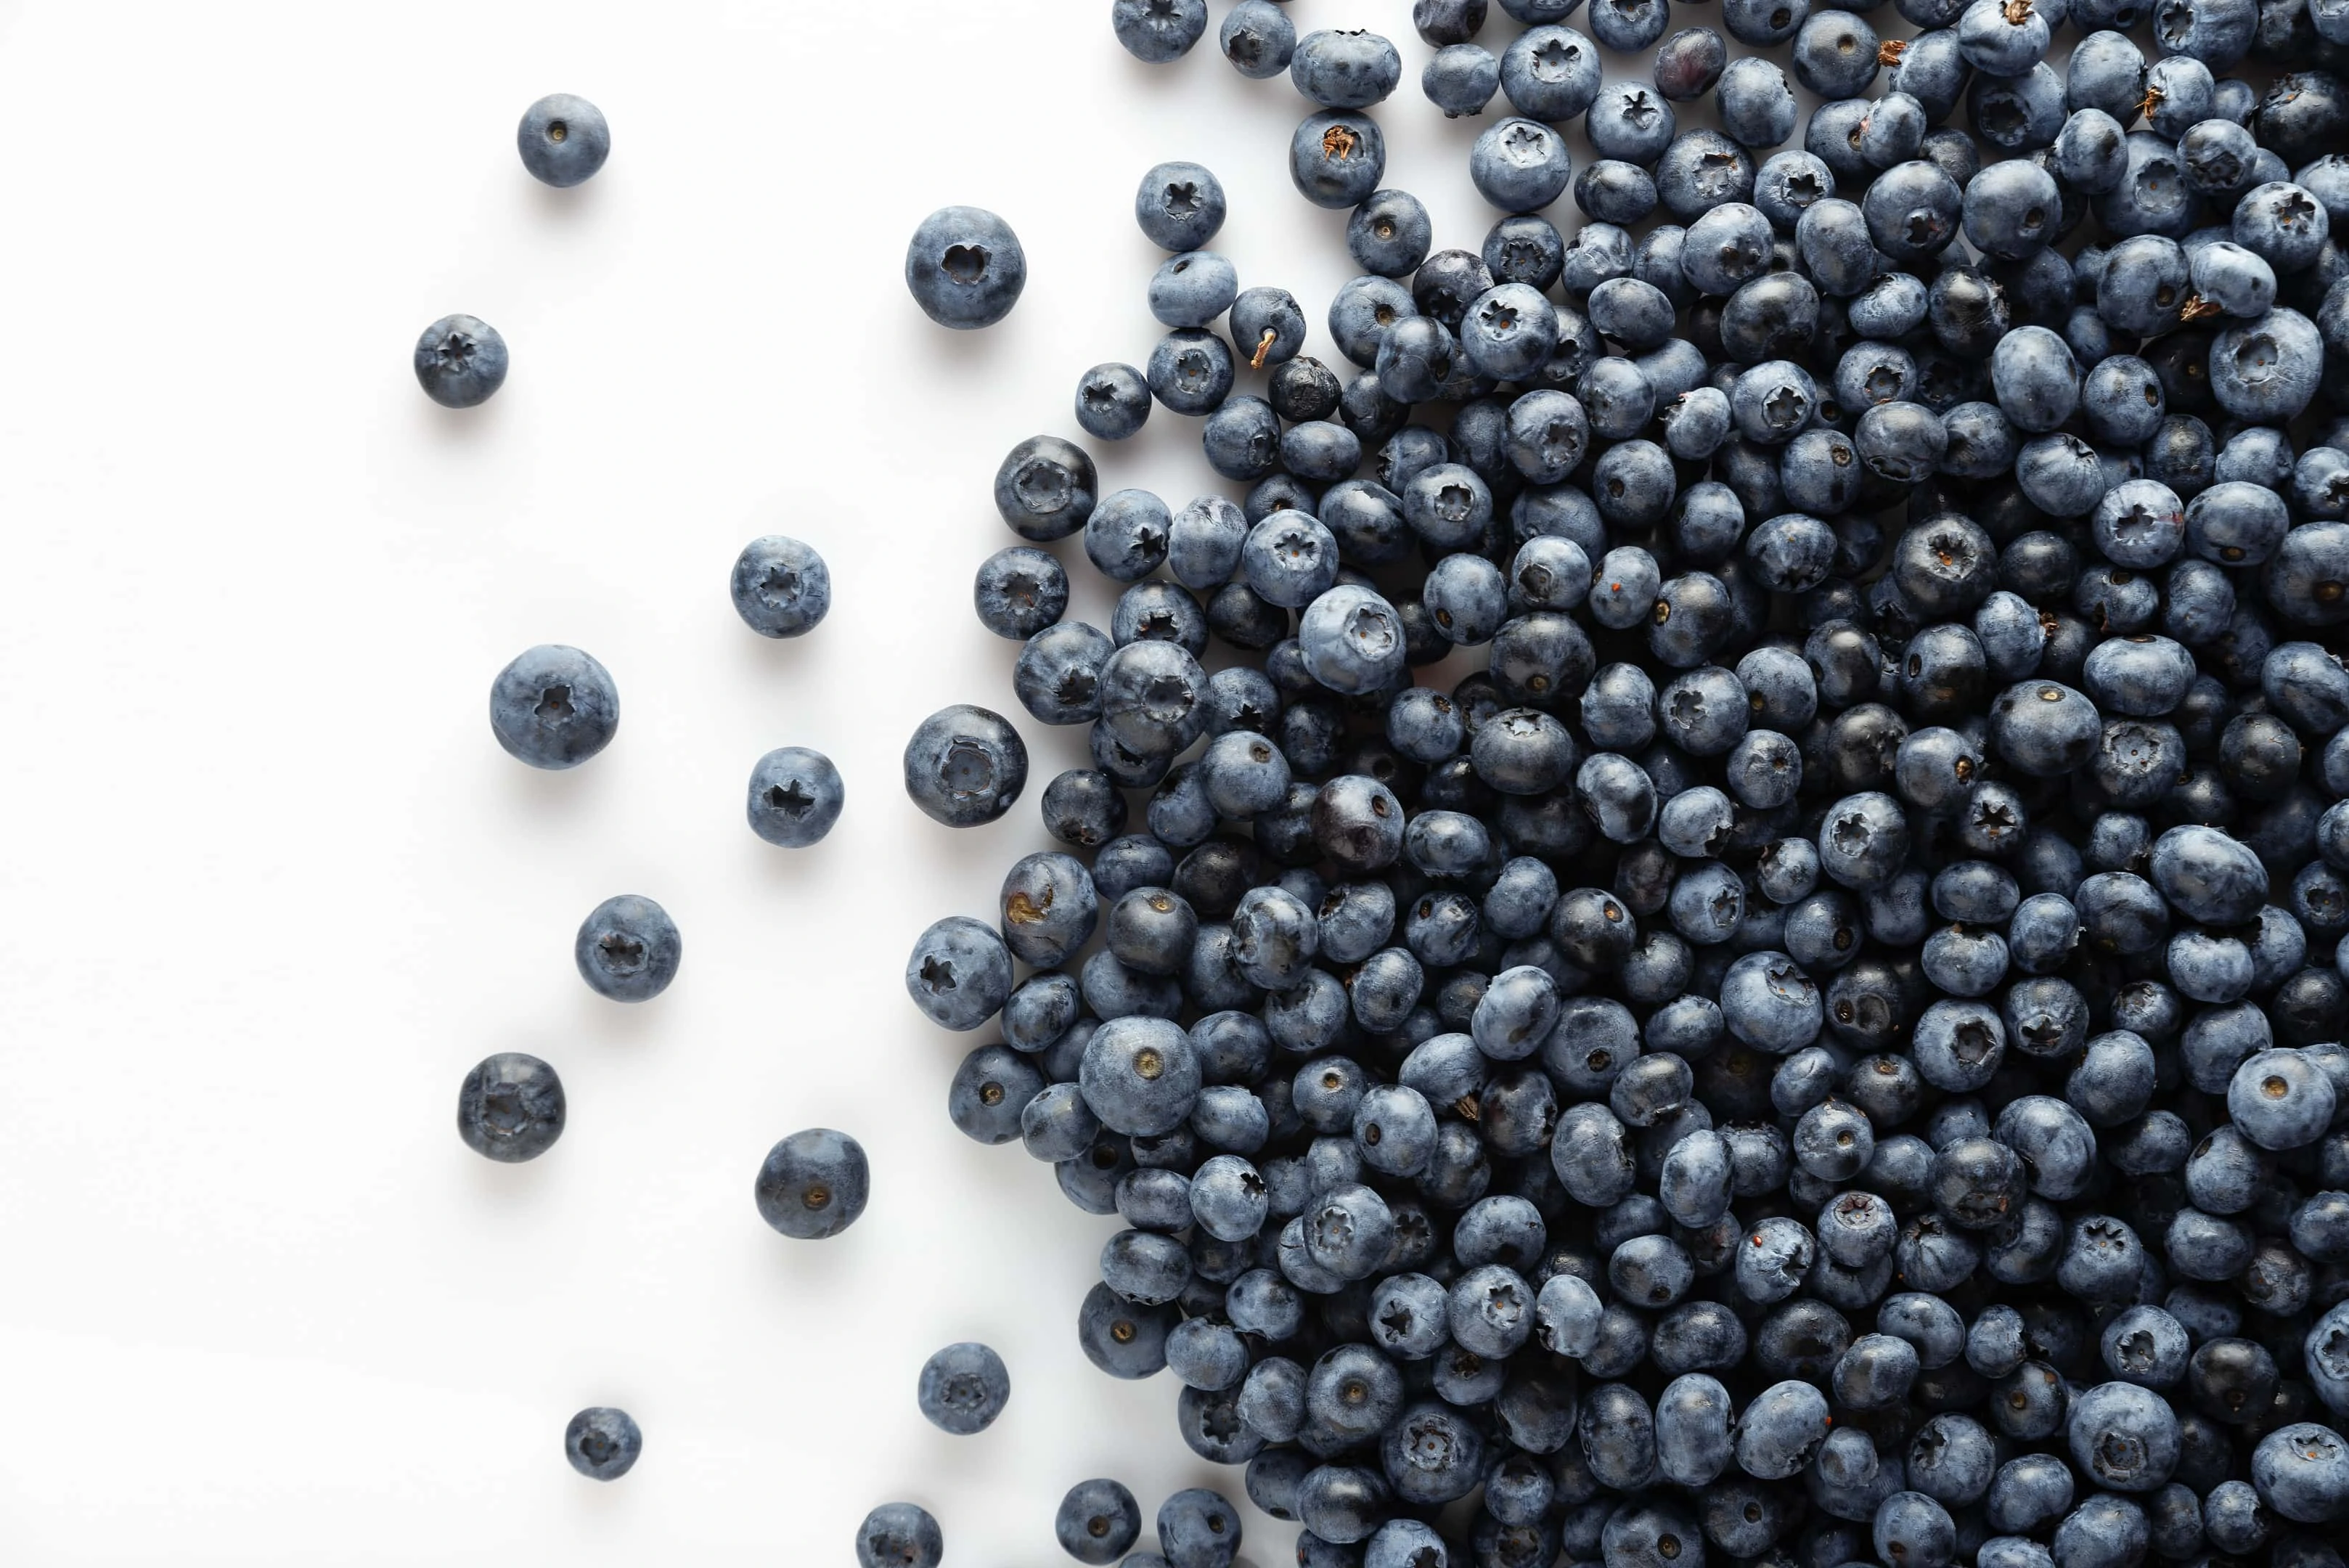 Blueberries scattered on white table